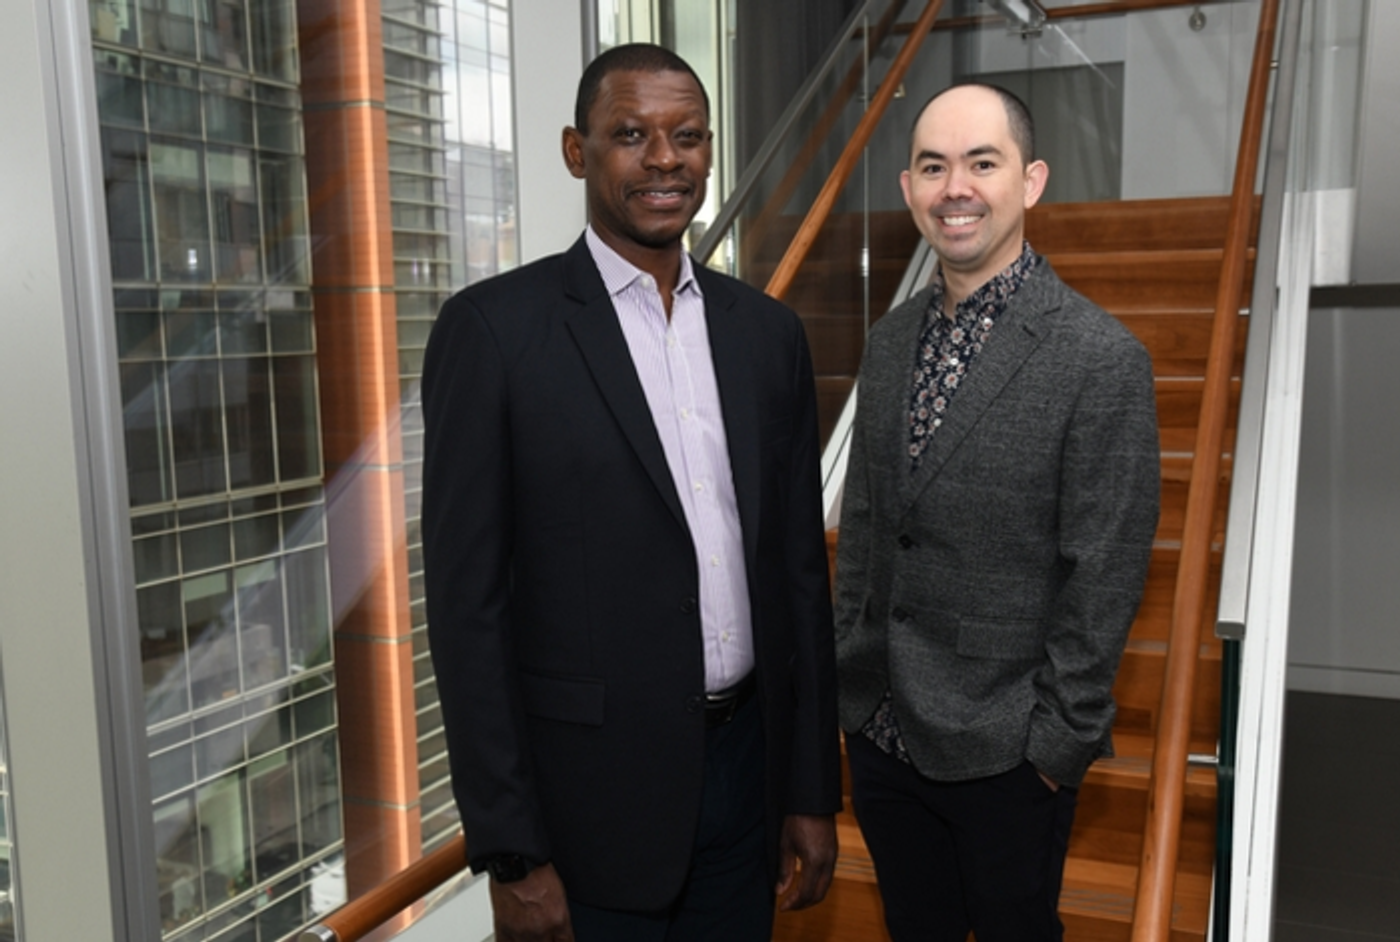 Grant recipients Dr. Lishomwa Ndhlovu and Dr. Michael Corley. Photo Credit: Weill Cornell Medicine